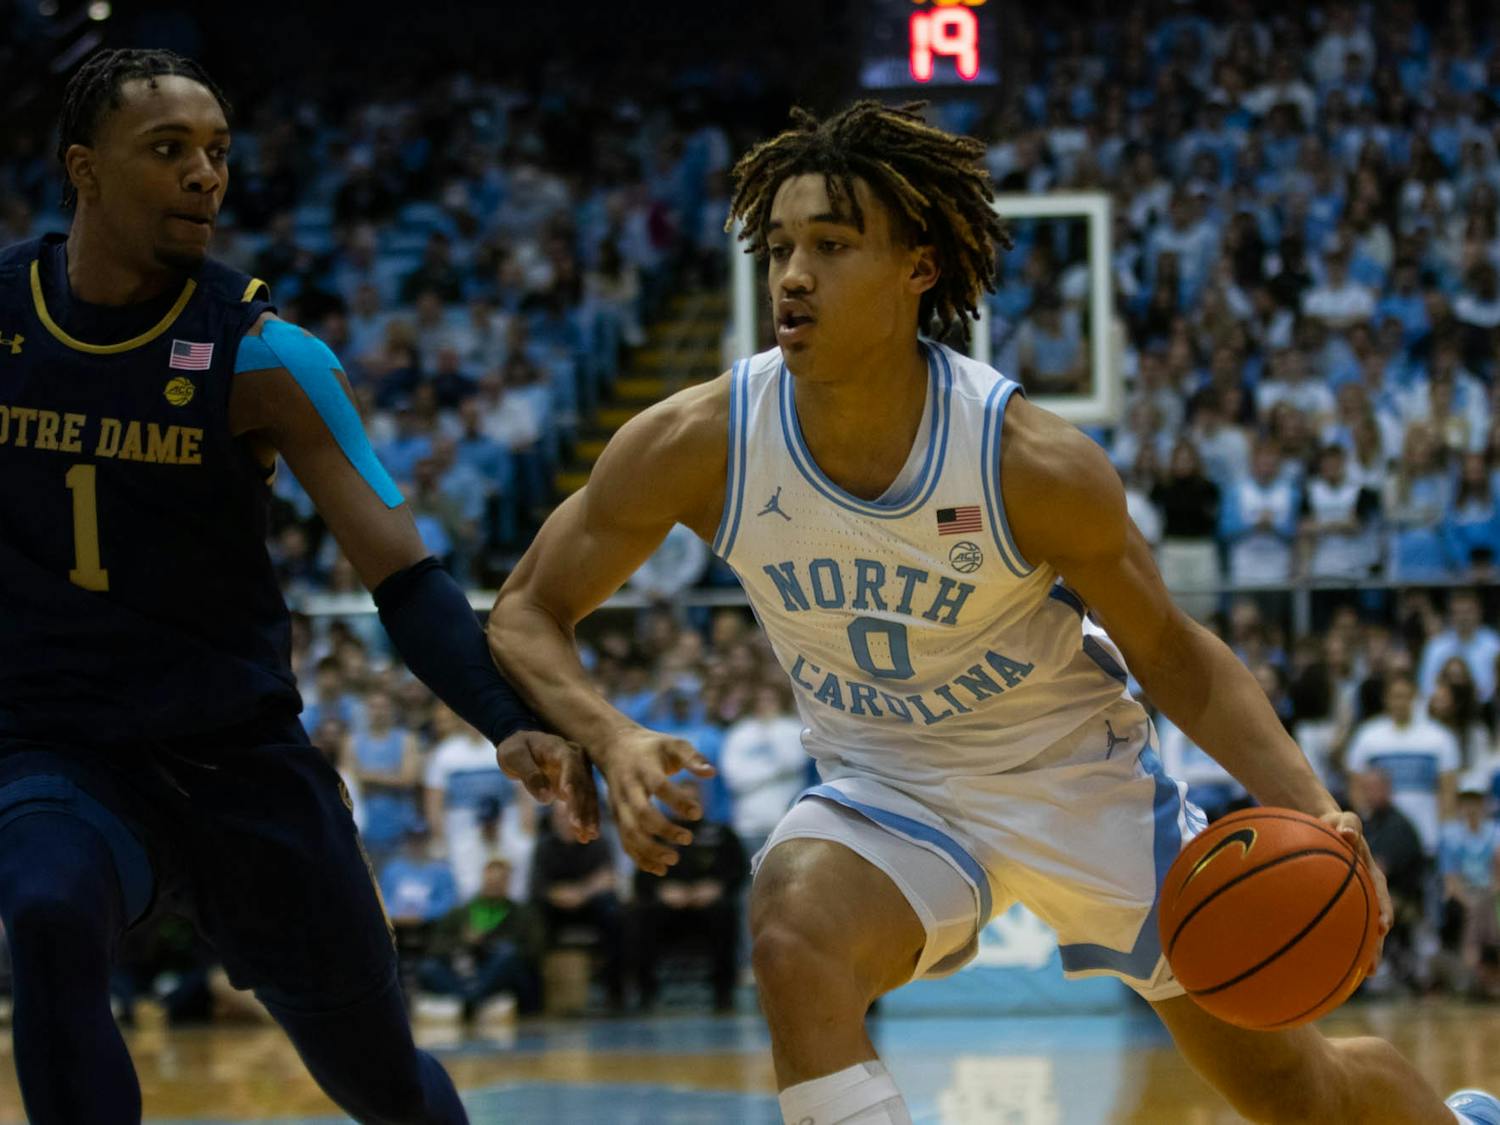 UNC freshman guard Seth Trimble (0) drives toward the basket in the game against Notre Dame in the Dean Smith Center on Jan. 7, 2023. UNC won 81-64.